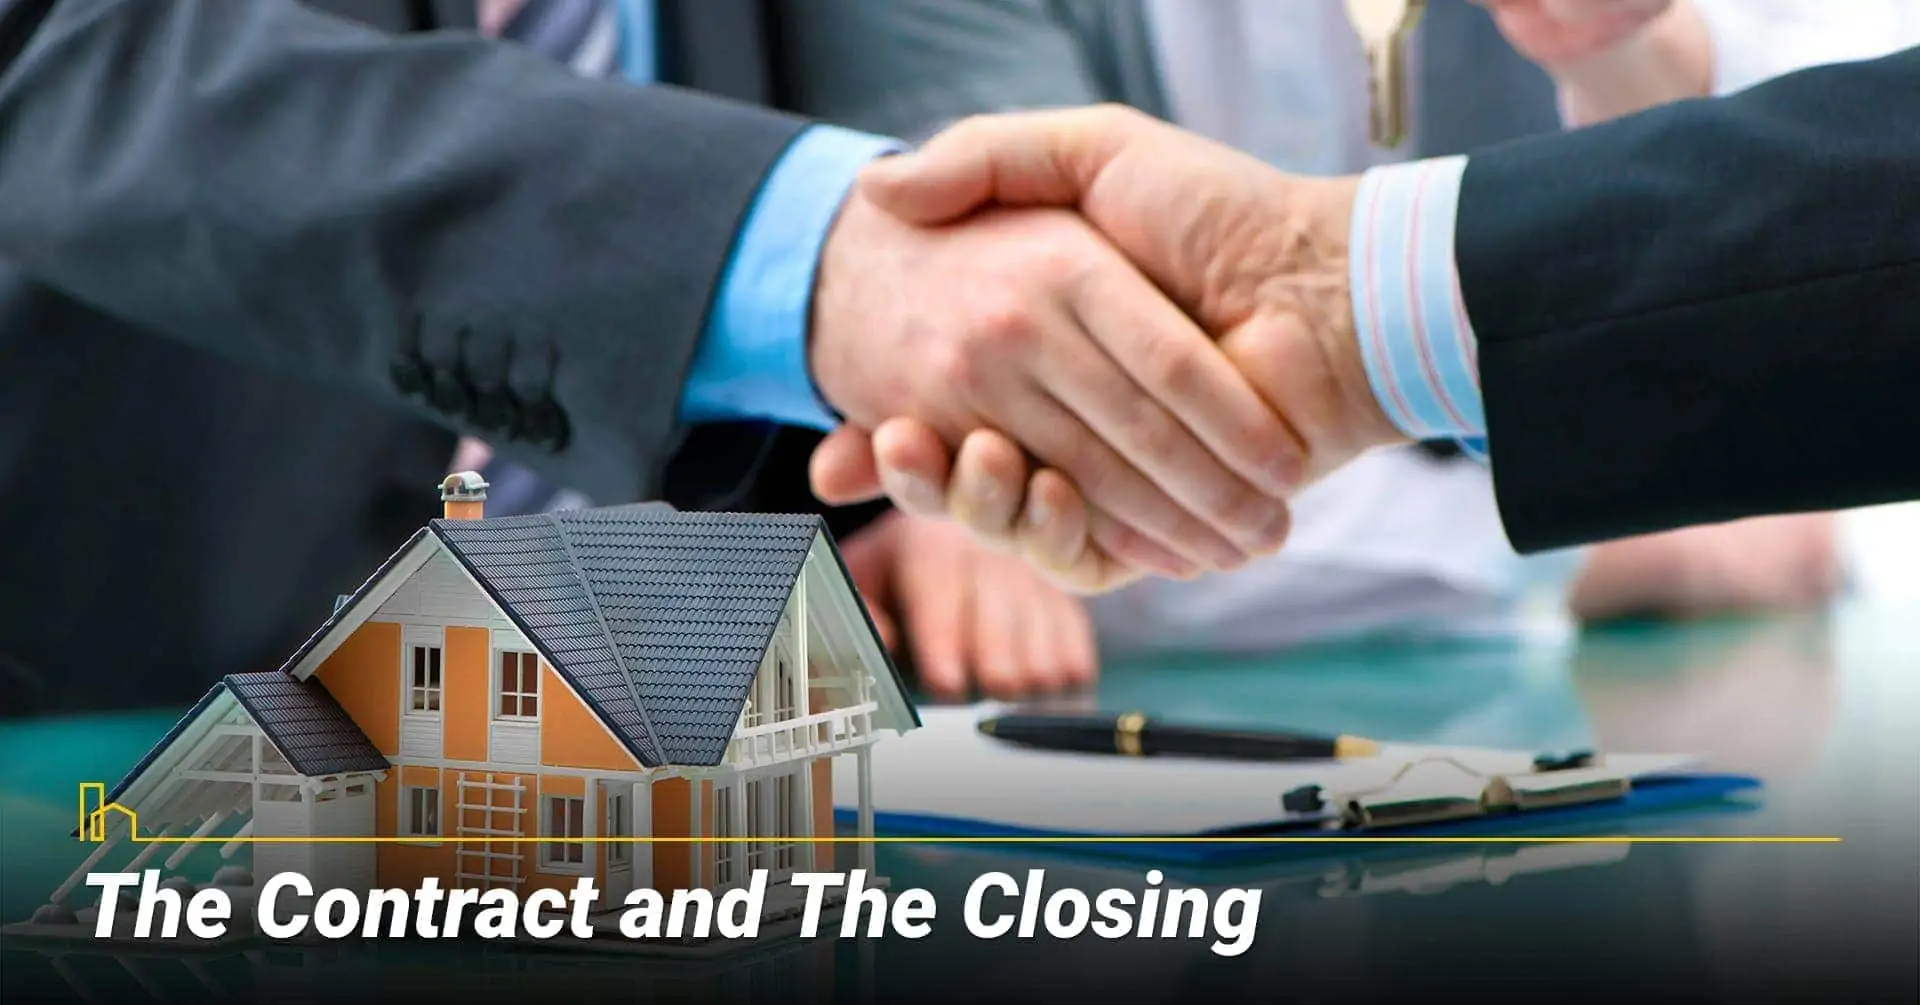 The Contract and The Closing, the final steps in selling a property